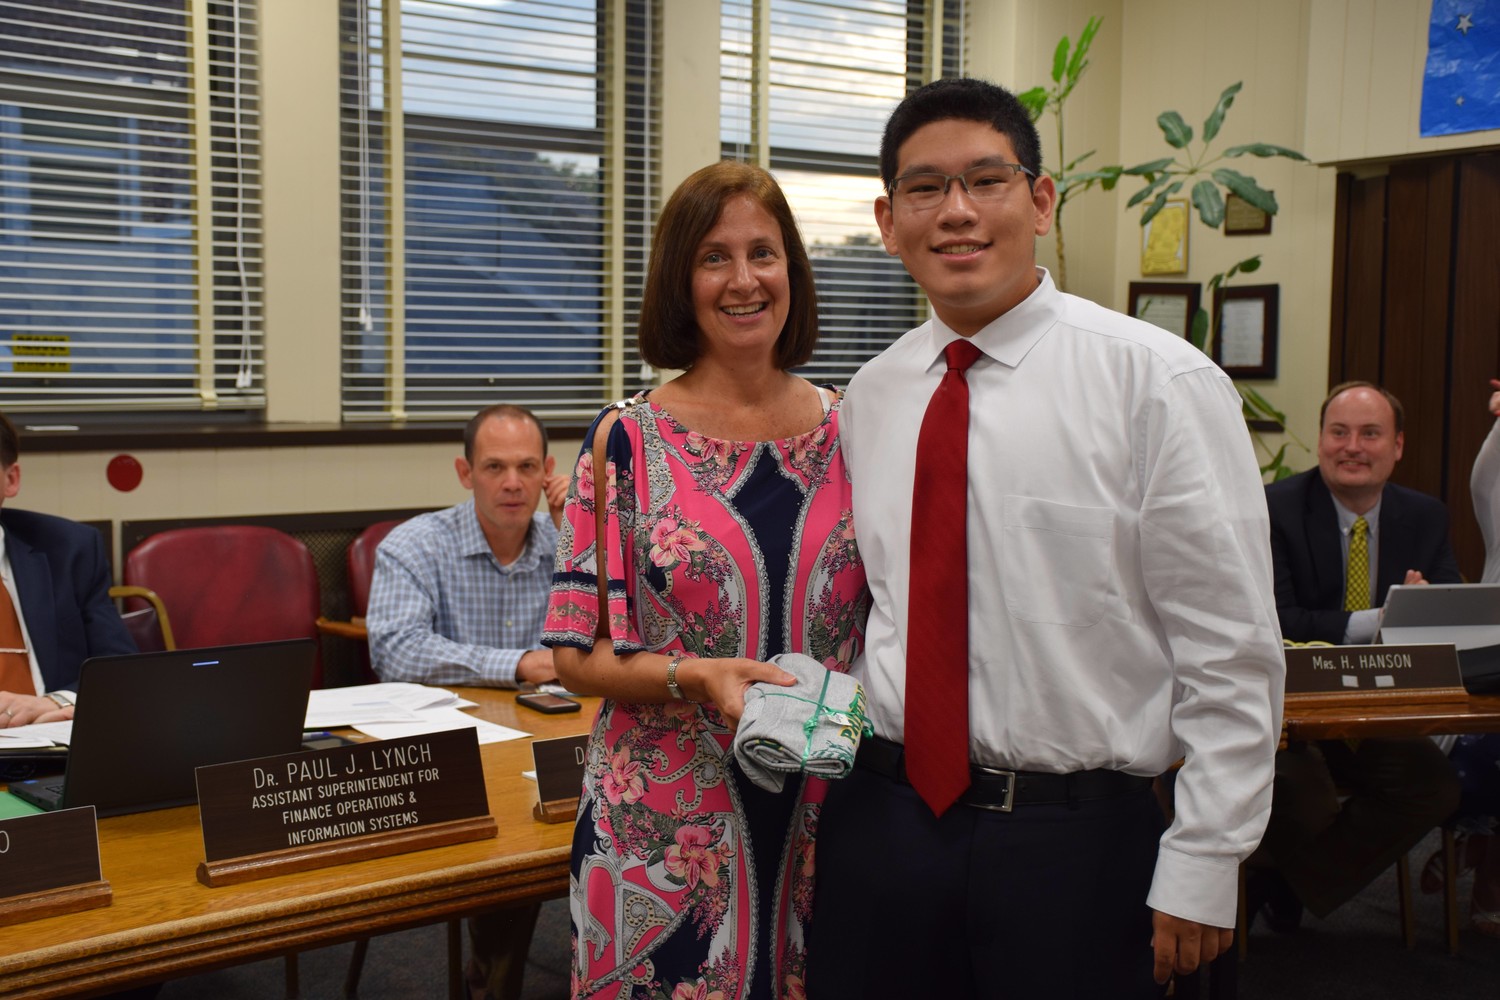 Bing was honored by the Lynbrook Board of Education after he had his theory published in the Journal of Emerging Investigators.